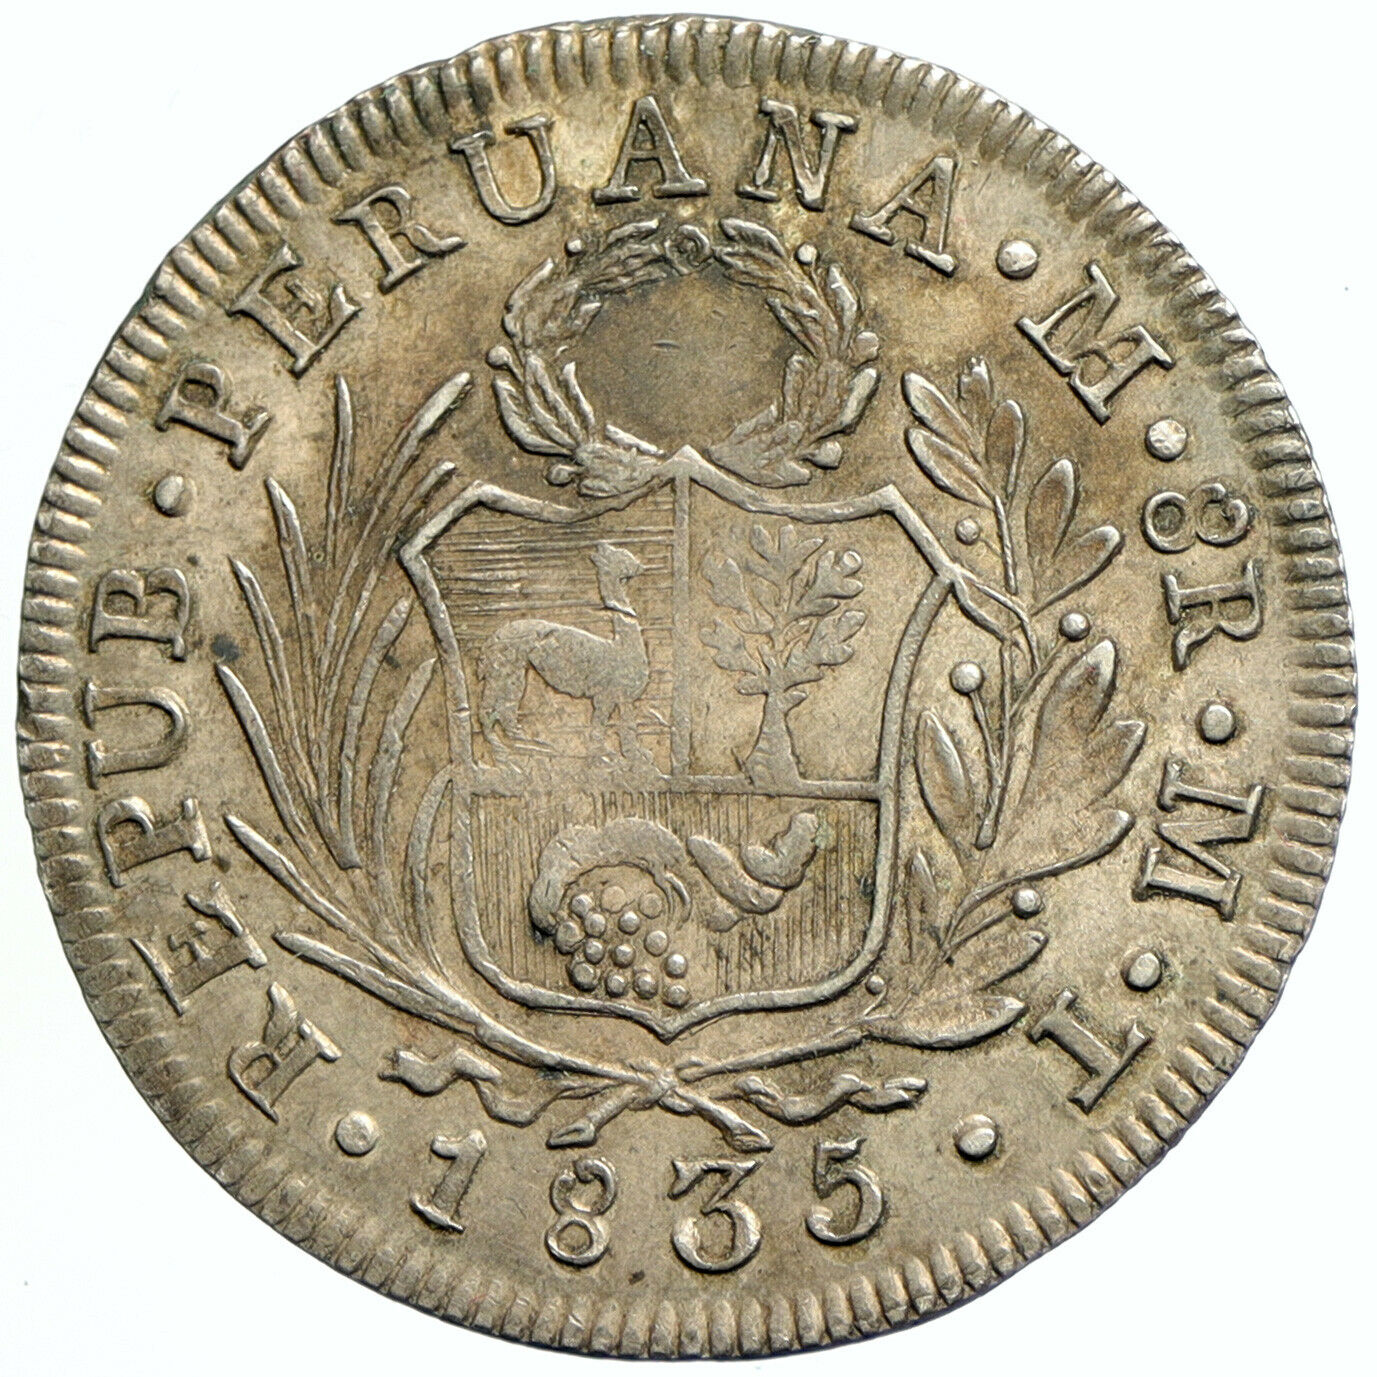 1835 PERU Antique LIBERY Huge Large Silver South America 8 Reales Coin i105521